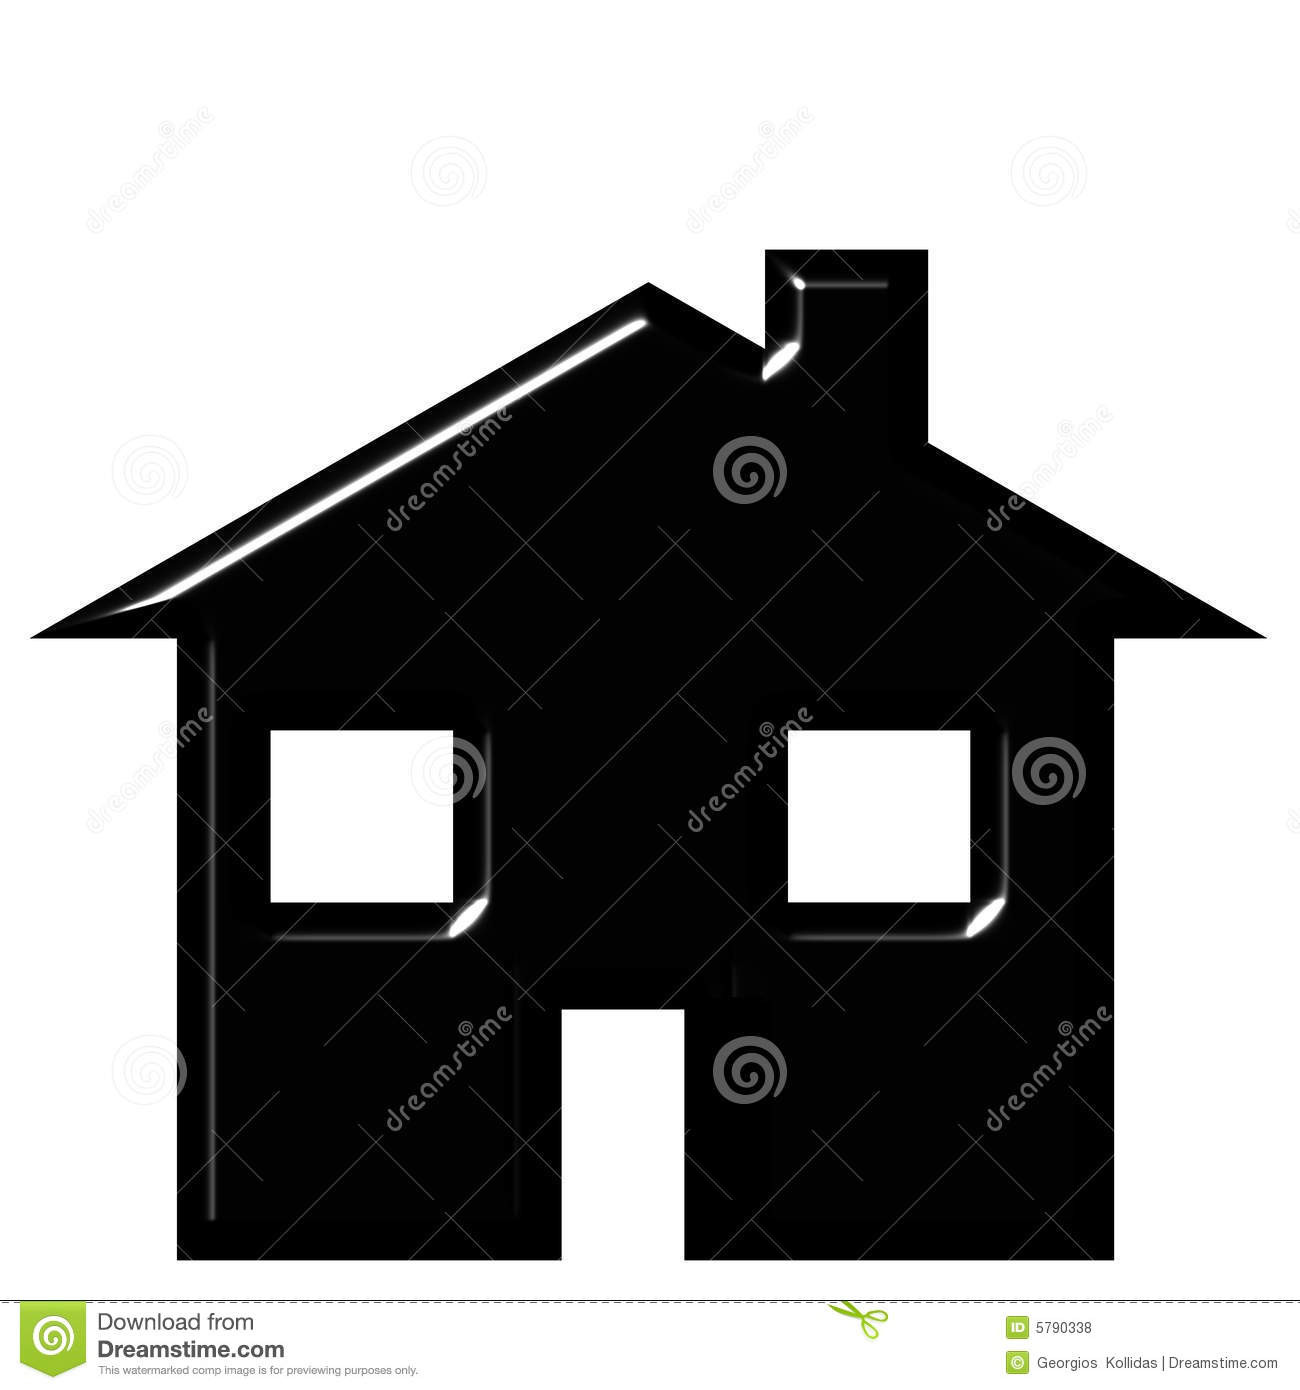 Haus Silhouette
 3D House Silhouette Royalty Free Stock s Image